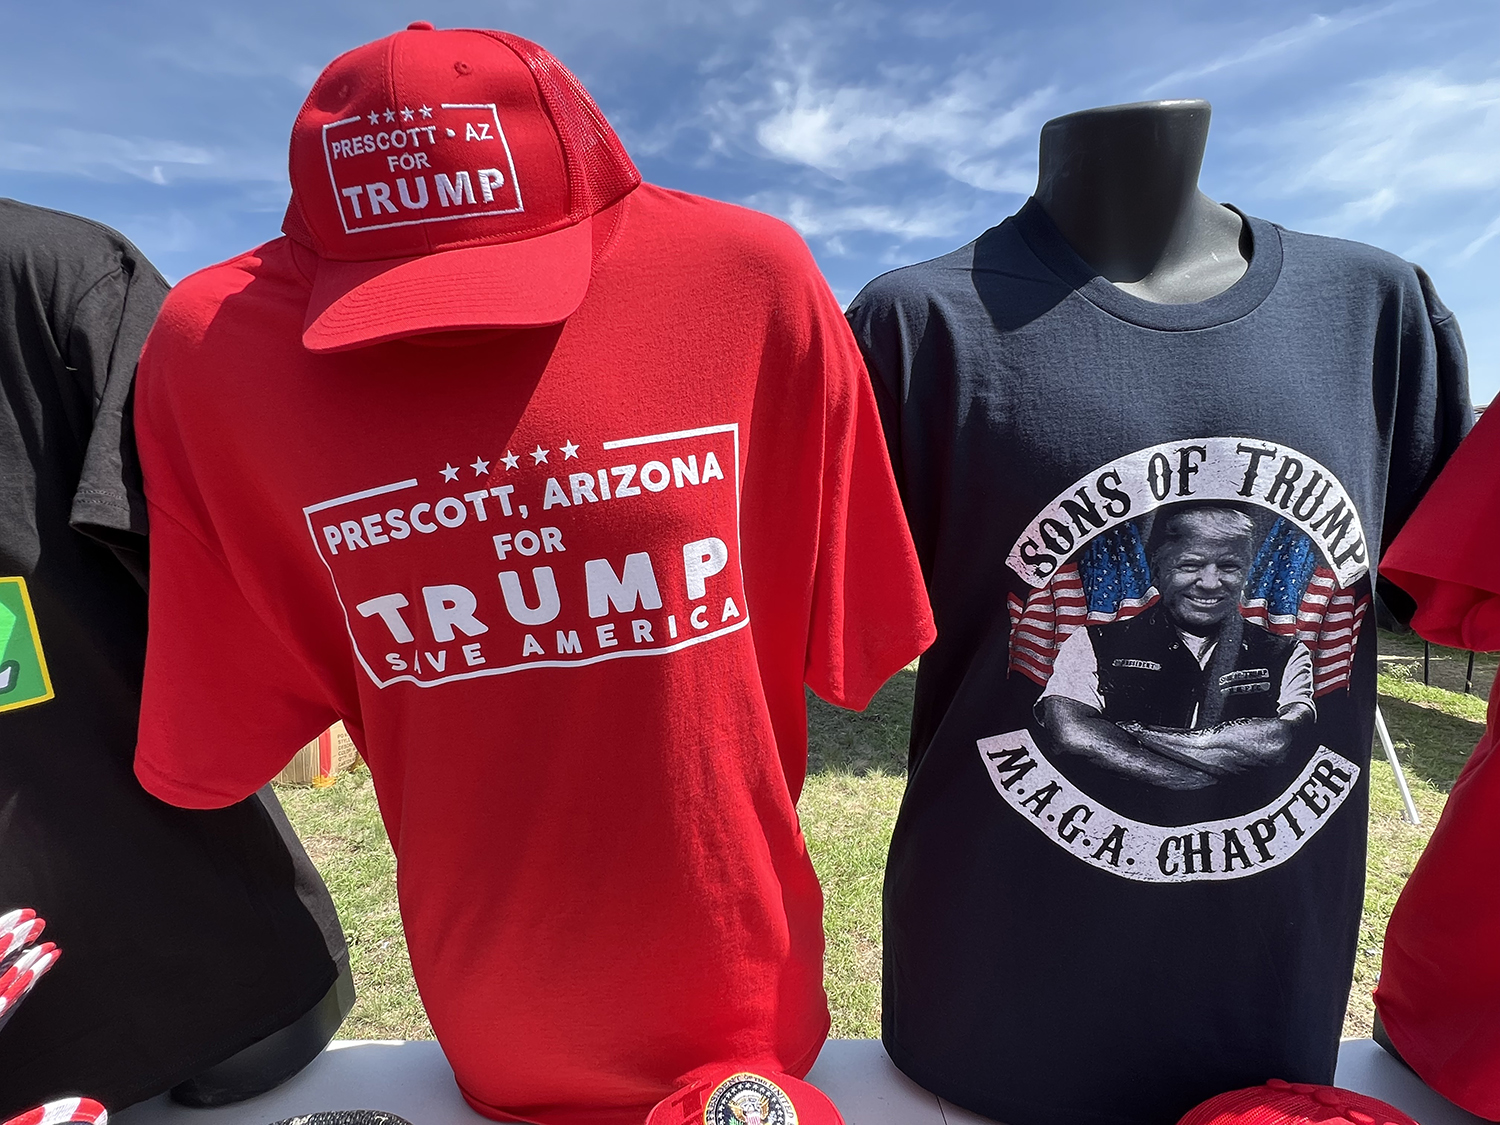 two shirts and a hat on sale being displayed at the merch booths. One shirt is bright red with white text reading 'Prescott, Arizona for Trump. Save America.' The red hat sitting on top matches the shirt in color and text. Another shirt being displayed next to the red shirt is a black spin on a Sons of Anarchy shirt with Trump photoshopped as a biker. The text reads 'Sons of Trump, MAGA Chapter.'